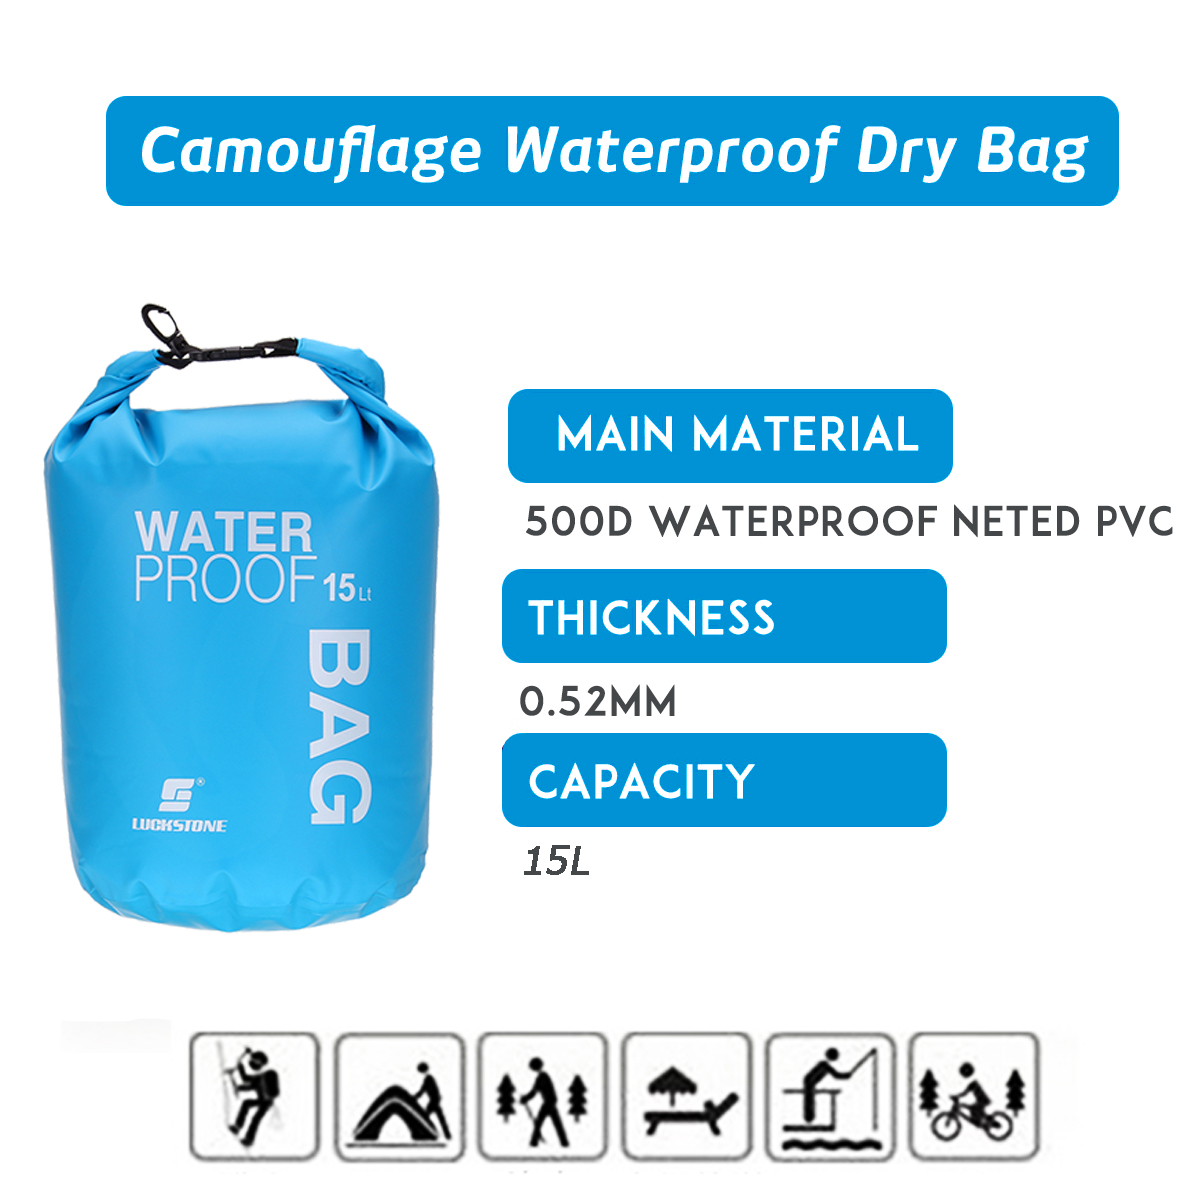 15L-Outdoor-Swimming-Air-Inflation-Floating-Mobile-Phone-Camera-Storage-PVC-Waterproof-Bag-1820816-2